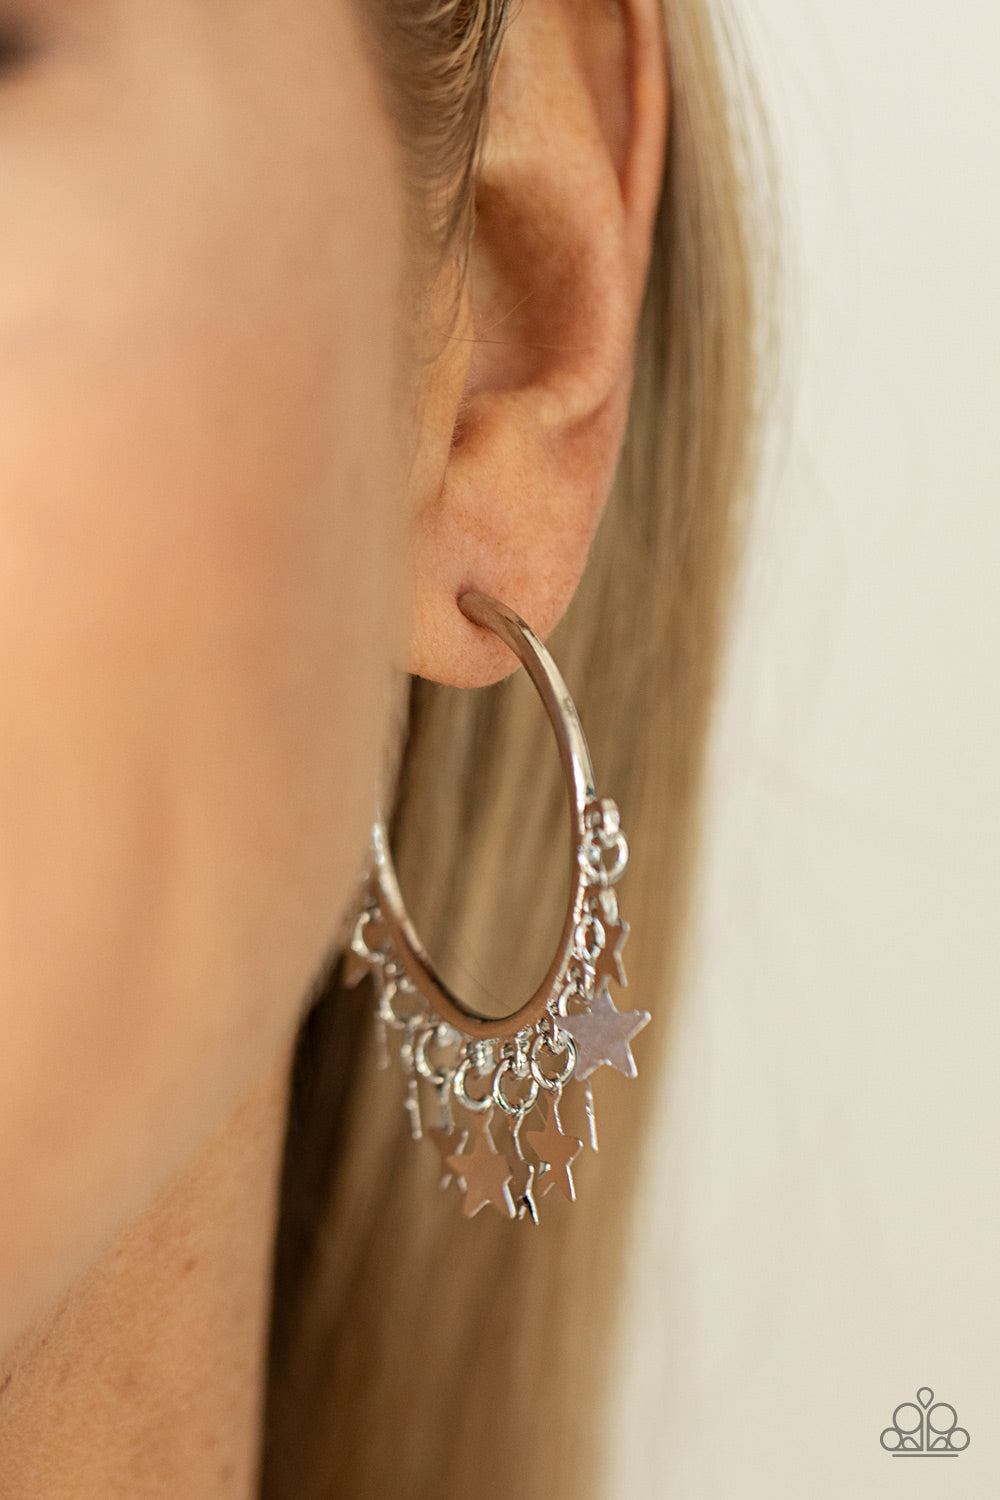 Happy Independence Day - Silver Star Charm Earrings - A shiny collection of silver star charms trickles from the bottom of a classic silver hoop, creating a stellar fringe. Earring attaches to a standard post fitting. Hoop measures approximately 1 1/4" in diameter. Sold as one pair of hoop earrings.